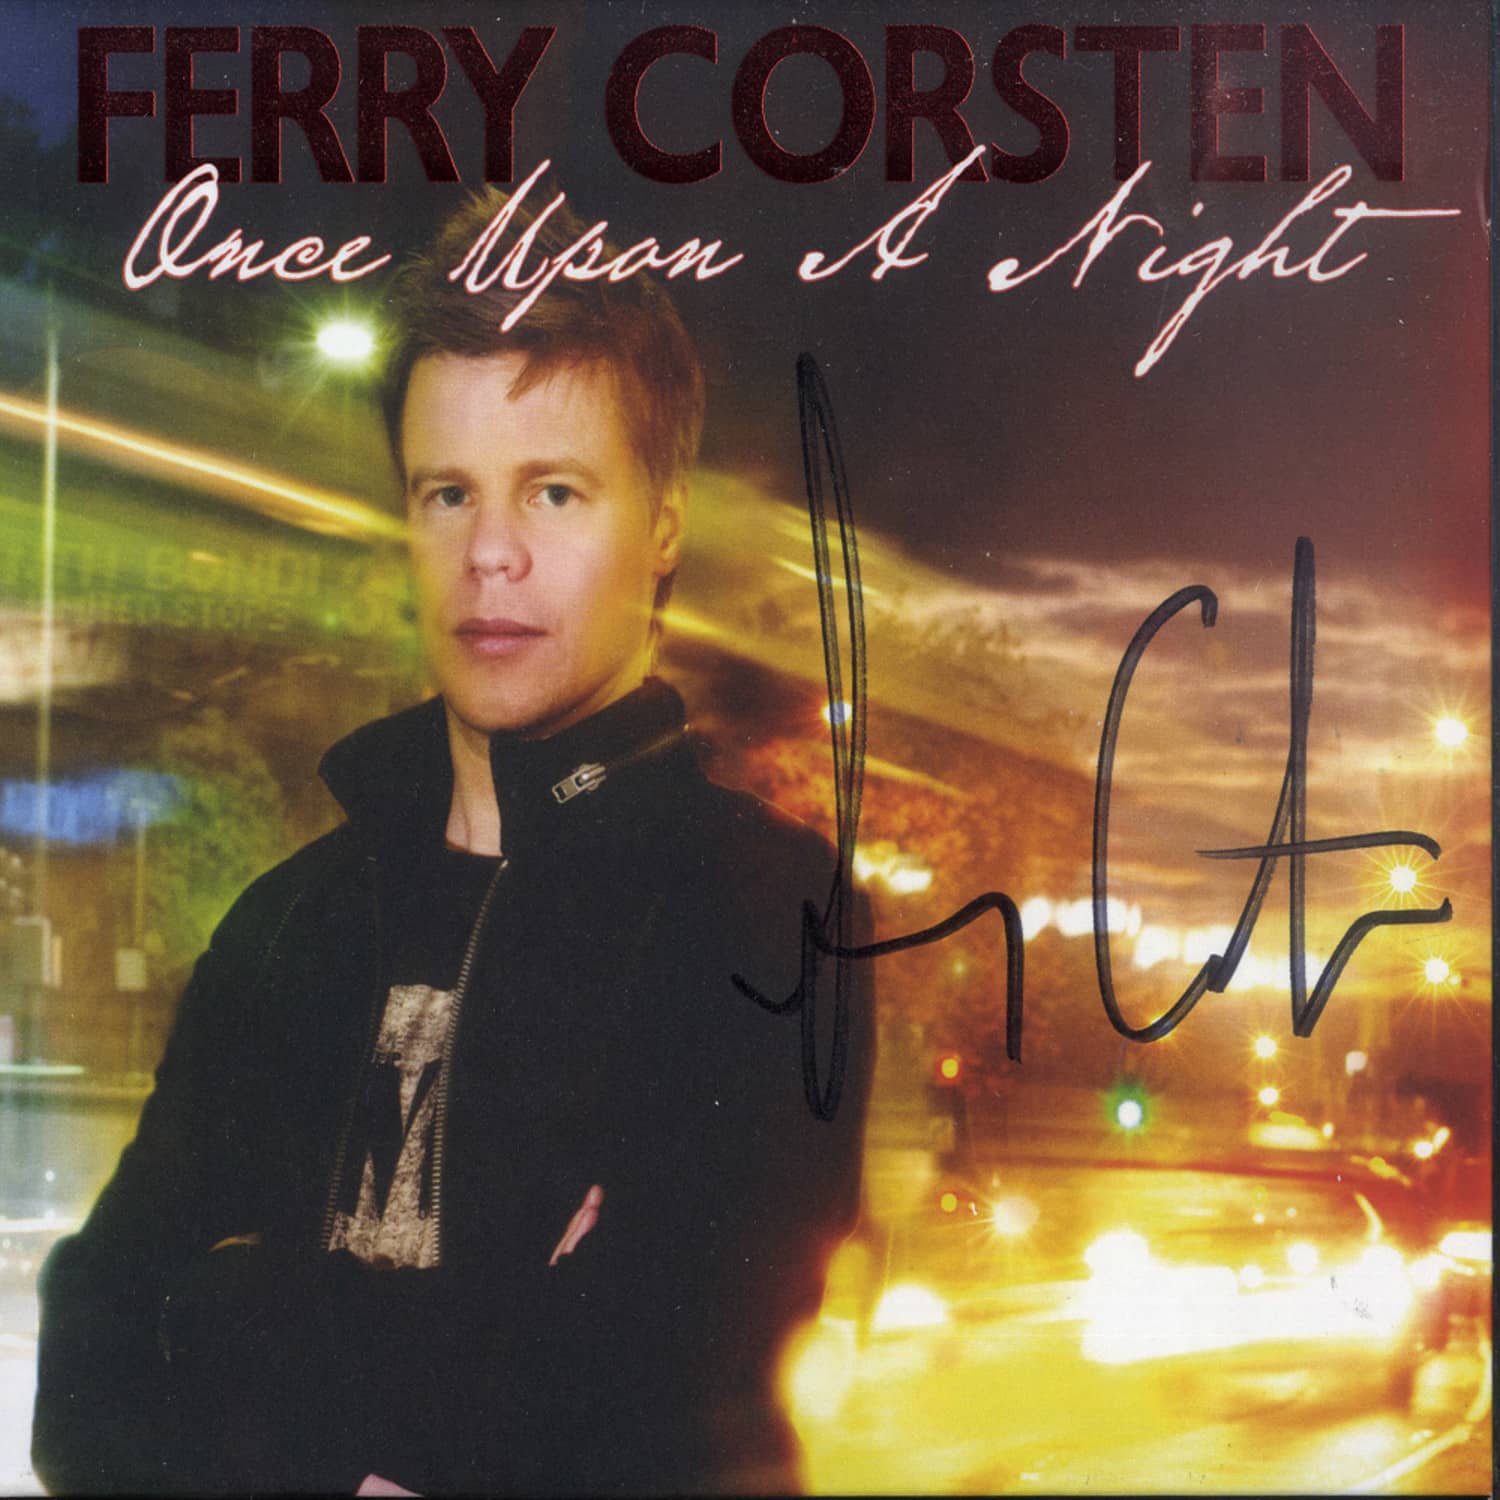 Ferry Corsten - Signed Copy - ONCE UPON A NIGHT VOL 2 